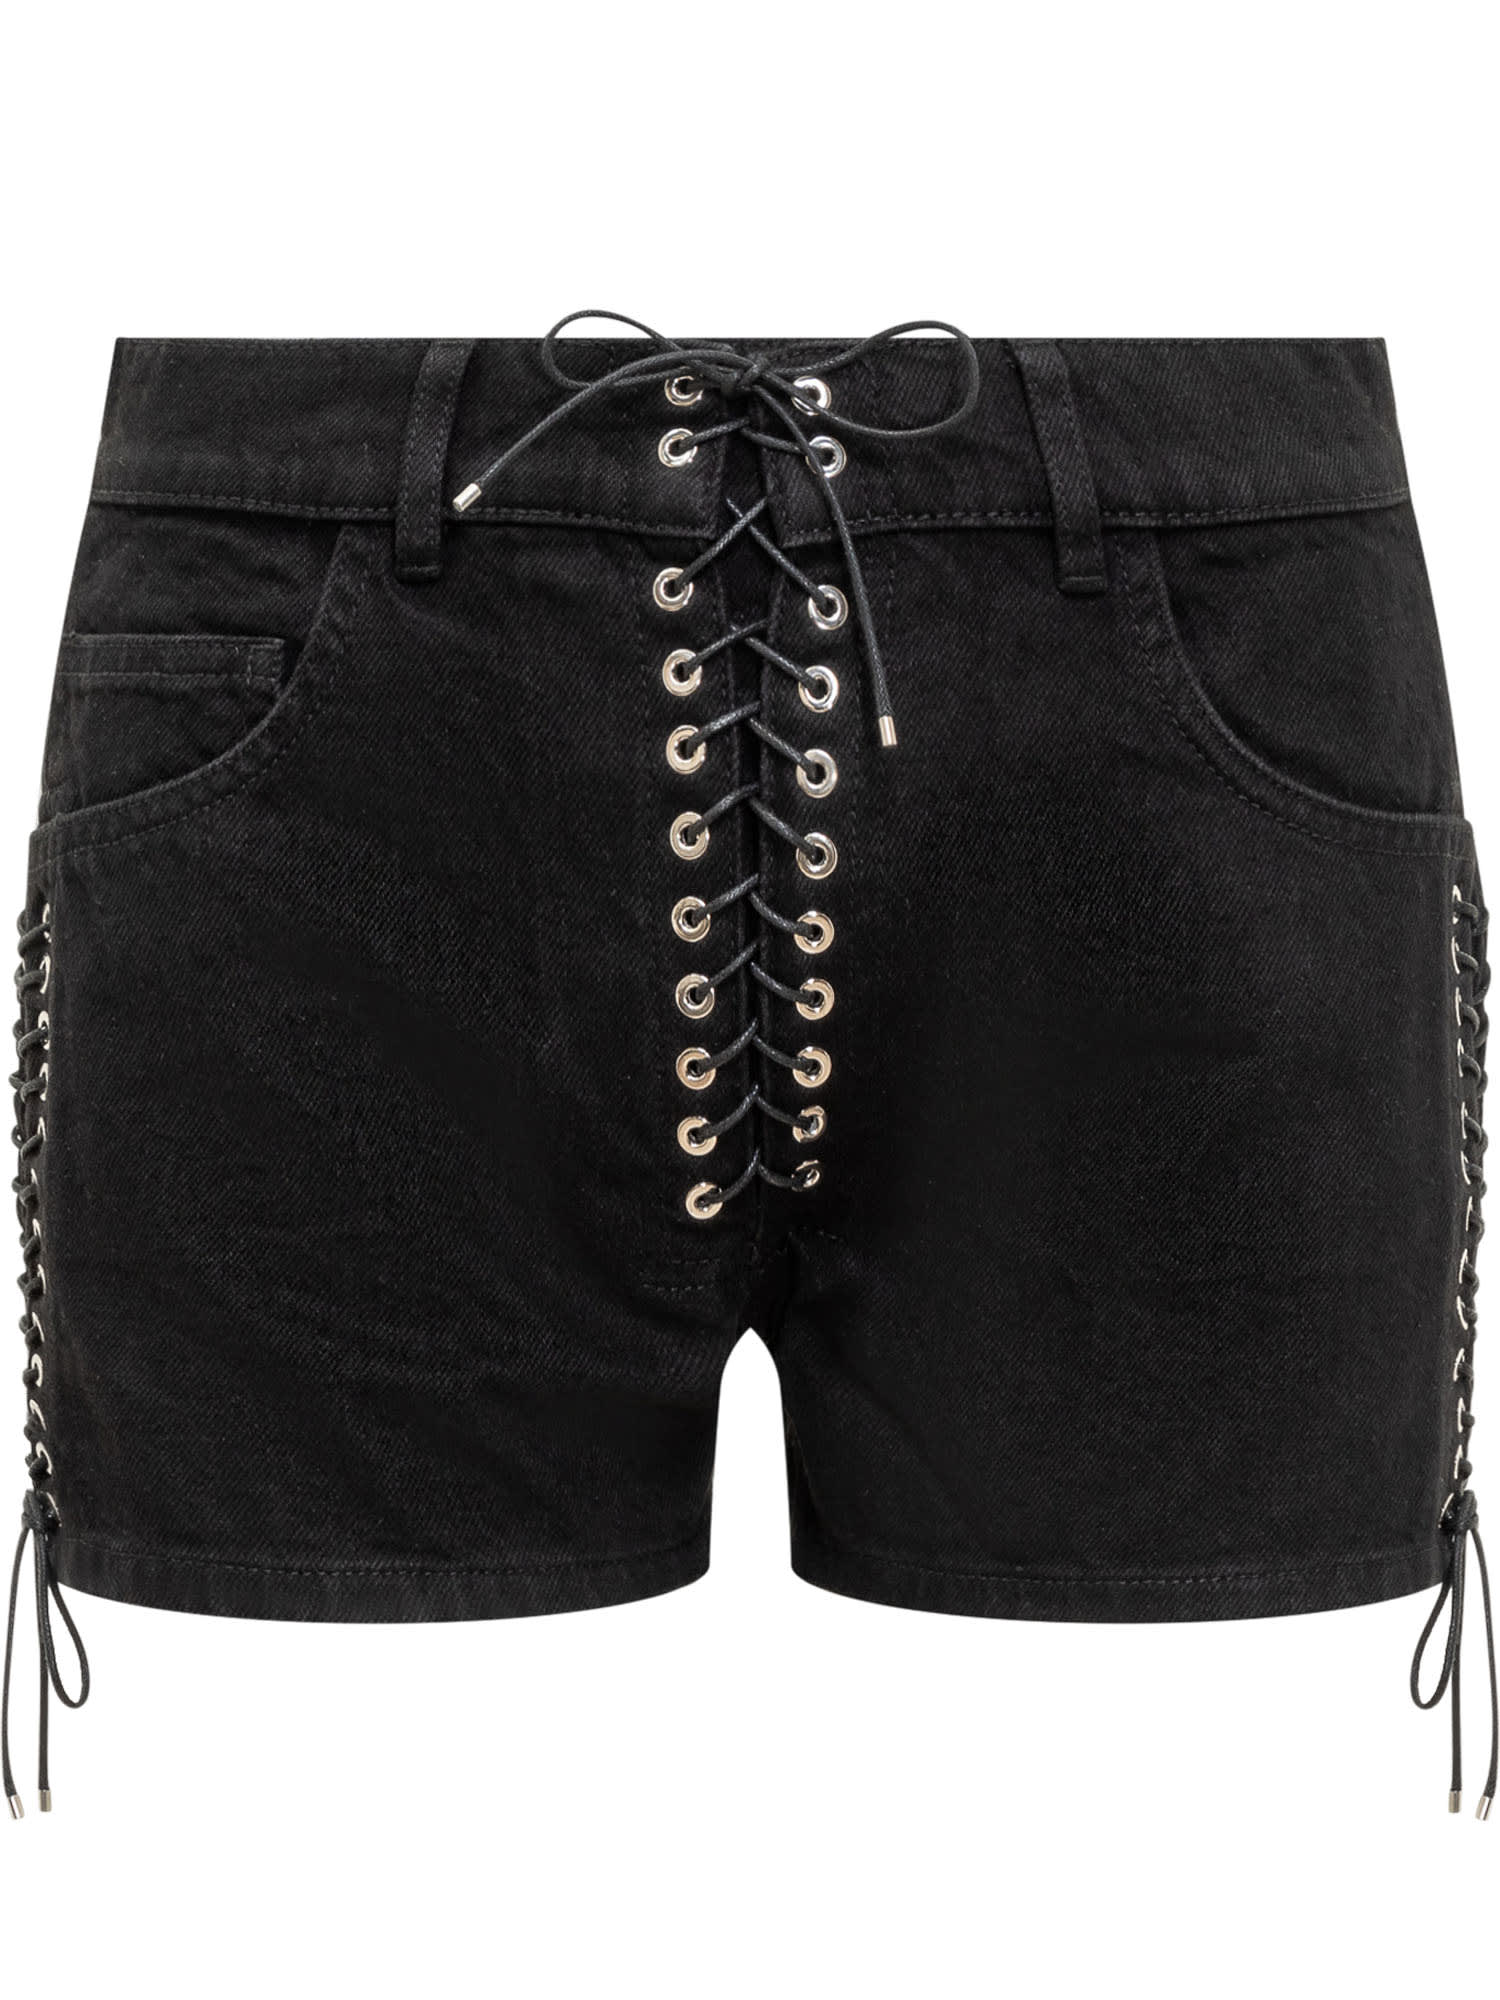 Double Laced Up Shorts